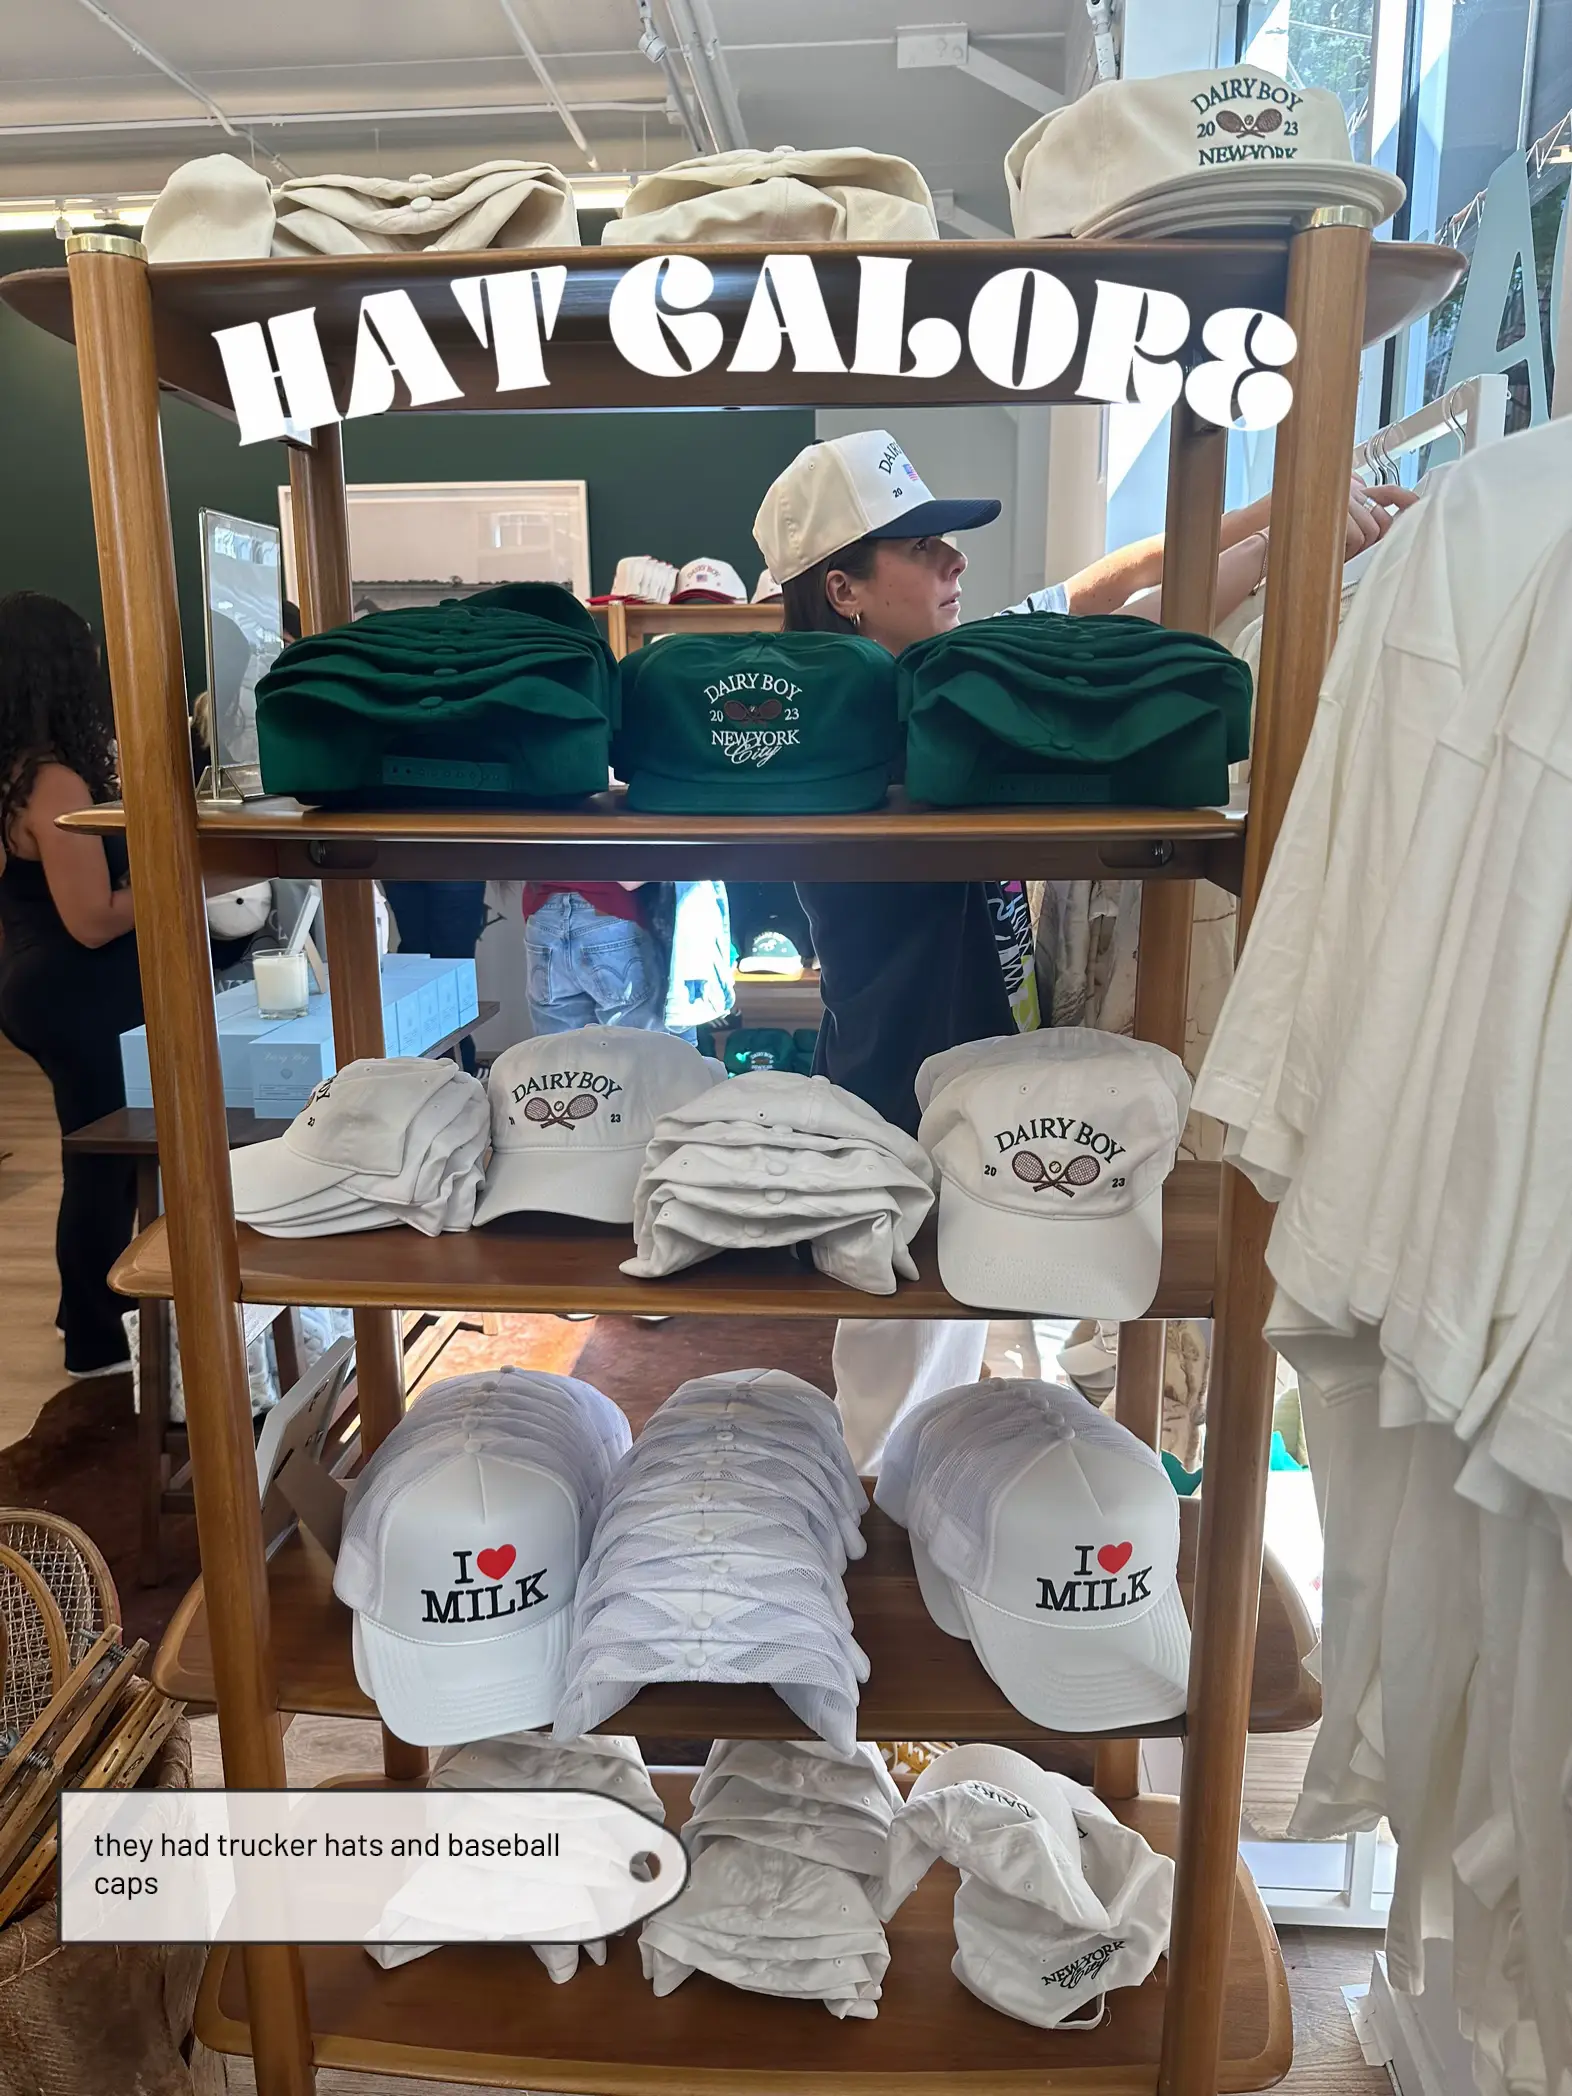 Hat Display Stand Examples for Cap and Headwear Merchandising Programs -  Part II